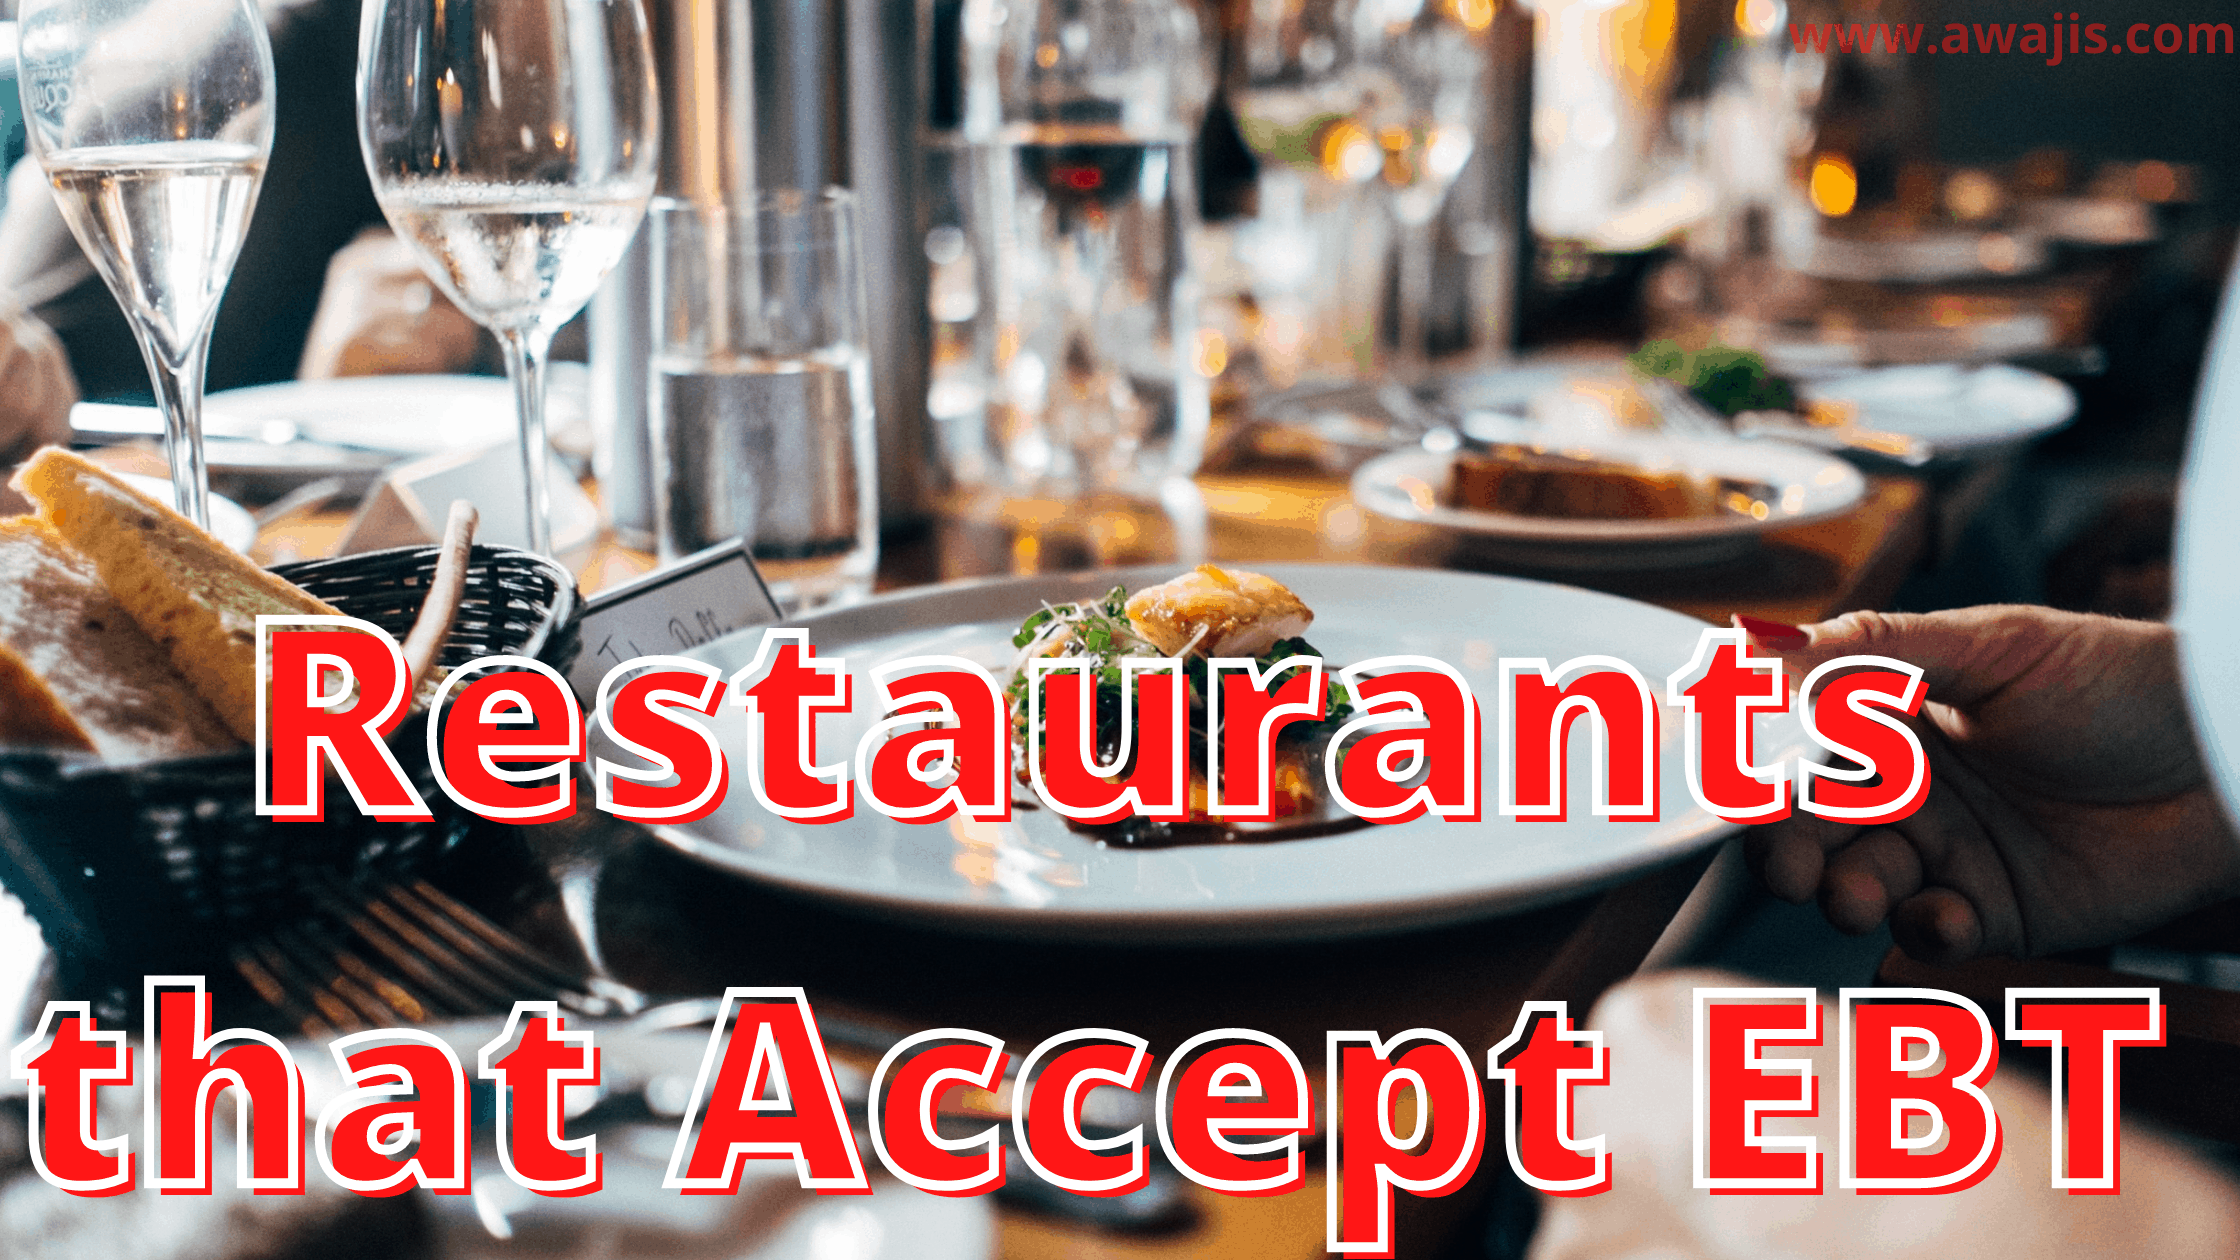 List of All Restaurants that Accept EBT and How to Locate Them